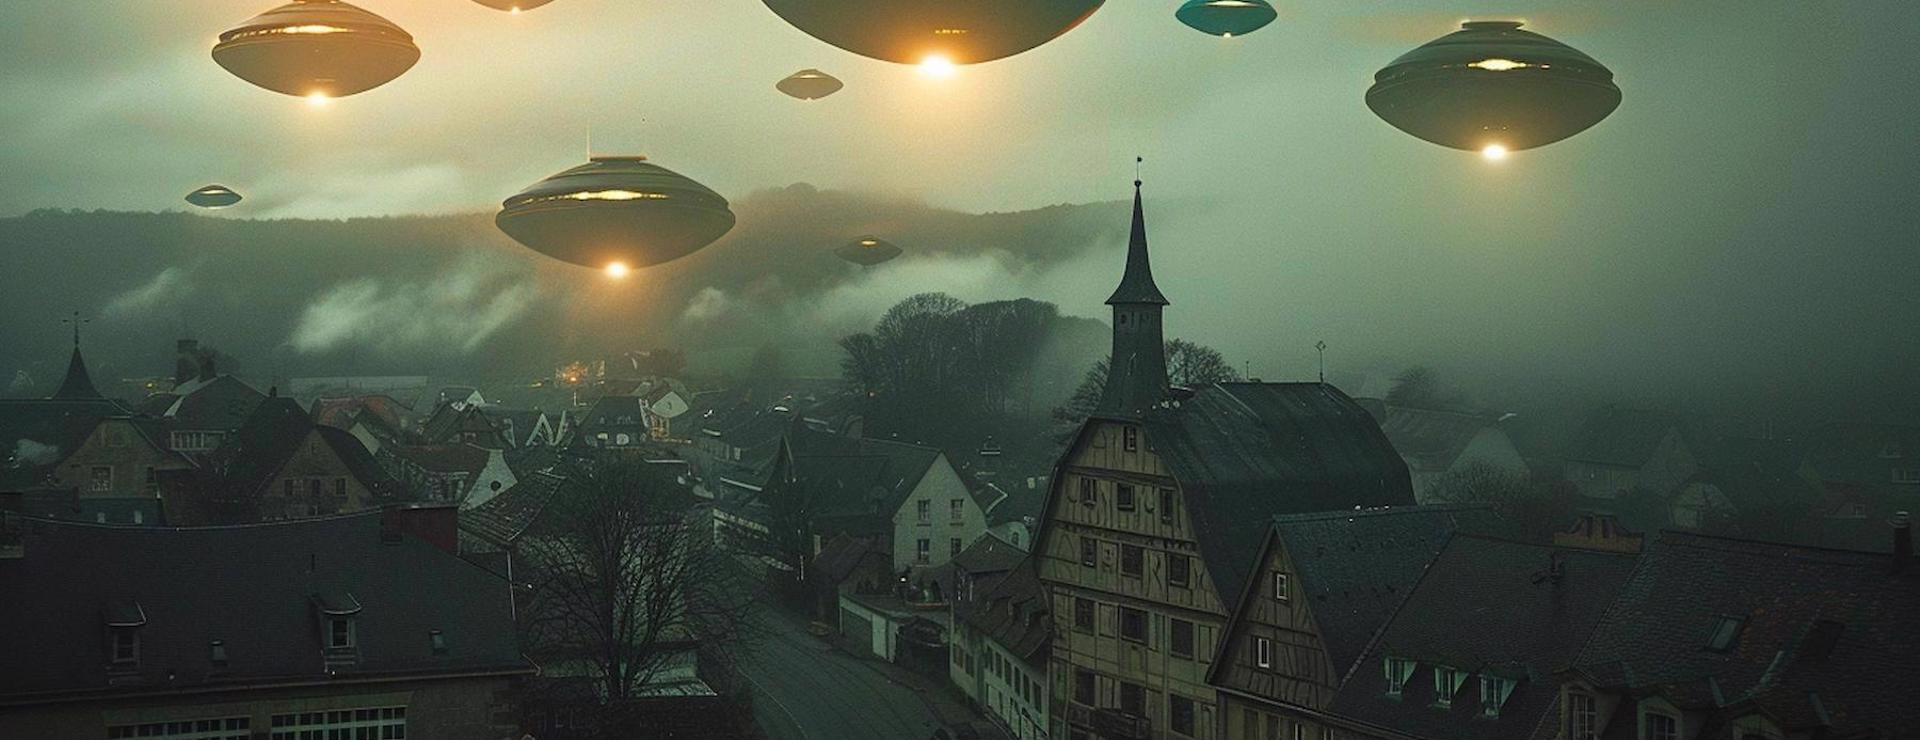 The Egg Shaped UFO Invasion of 1957